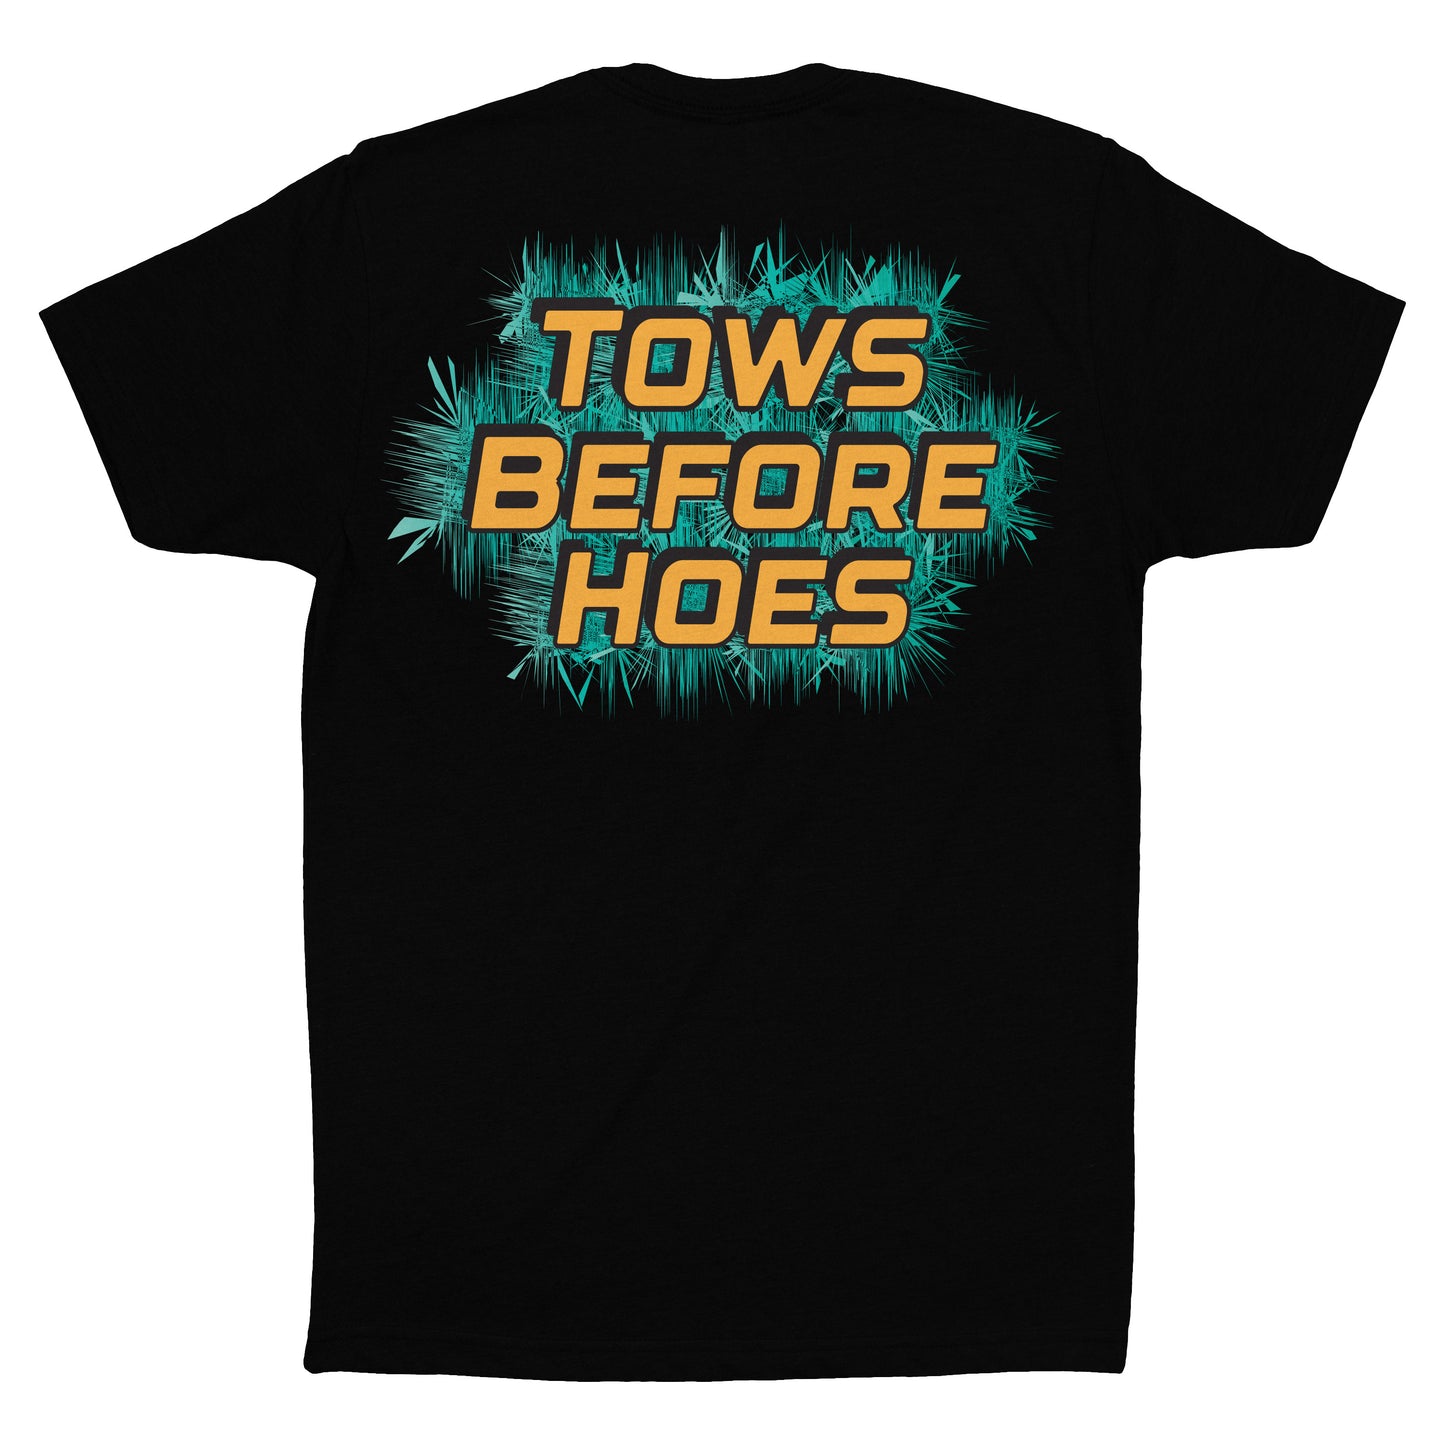 Tows Before Hoes t-shirt